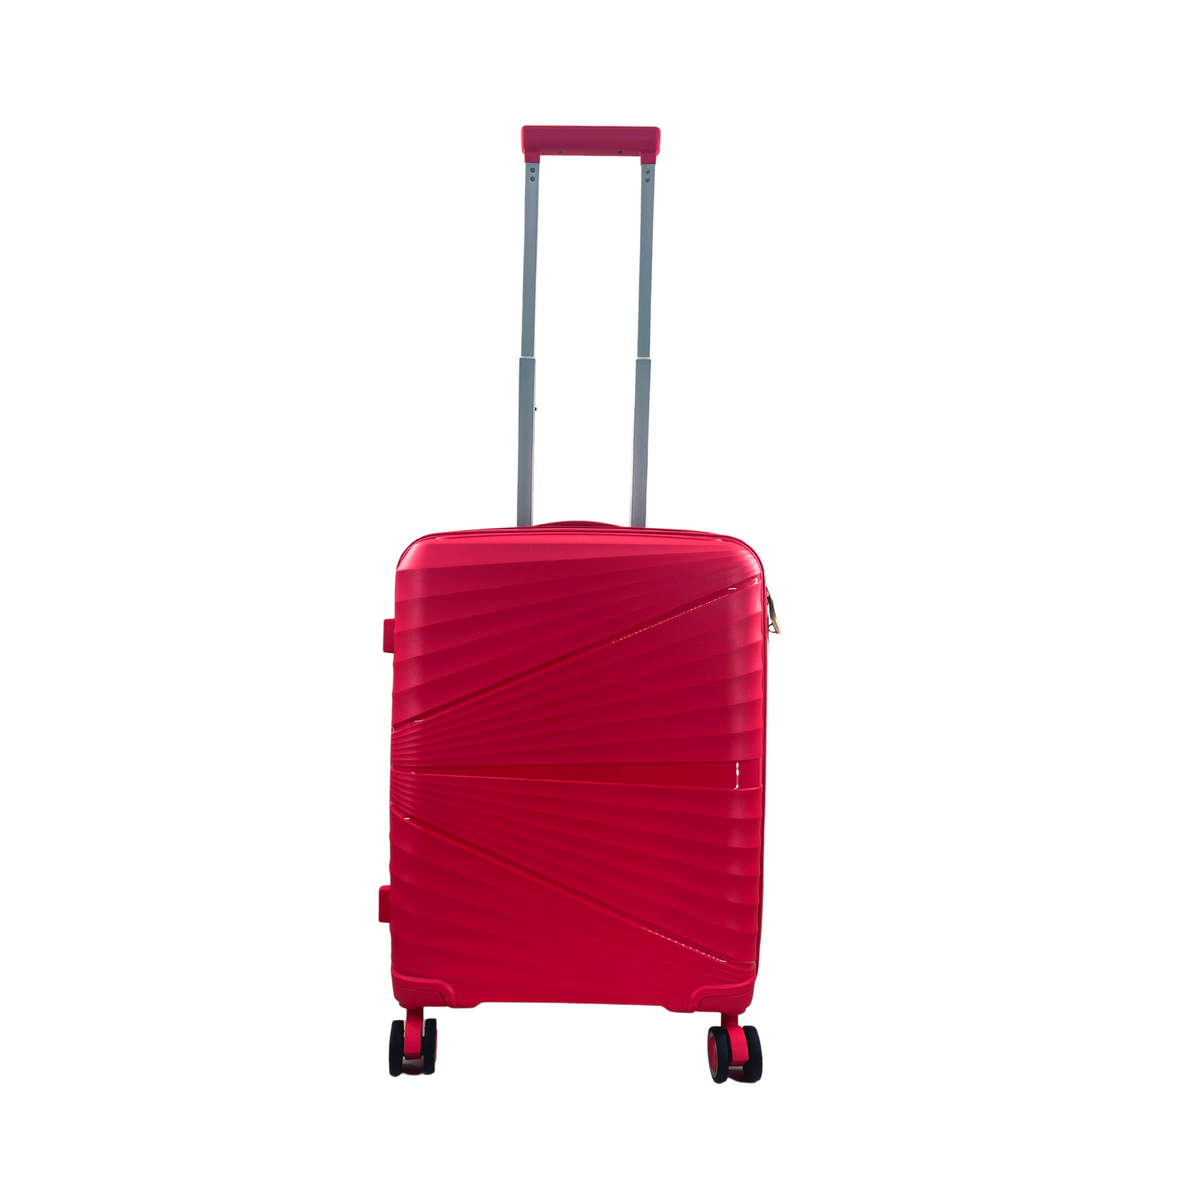 Hand luggage in Soft Polypropylene Light 55x40x25cm With Luck Tsa Small Summer Trolley High quality light quality